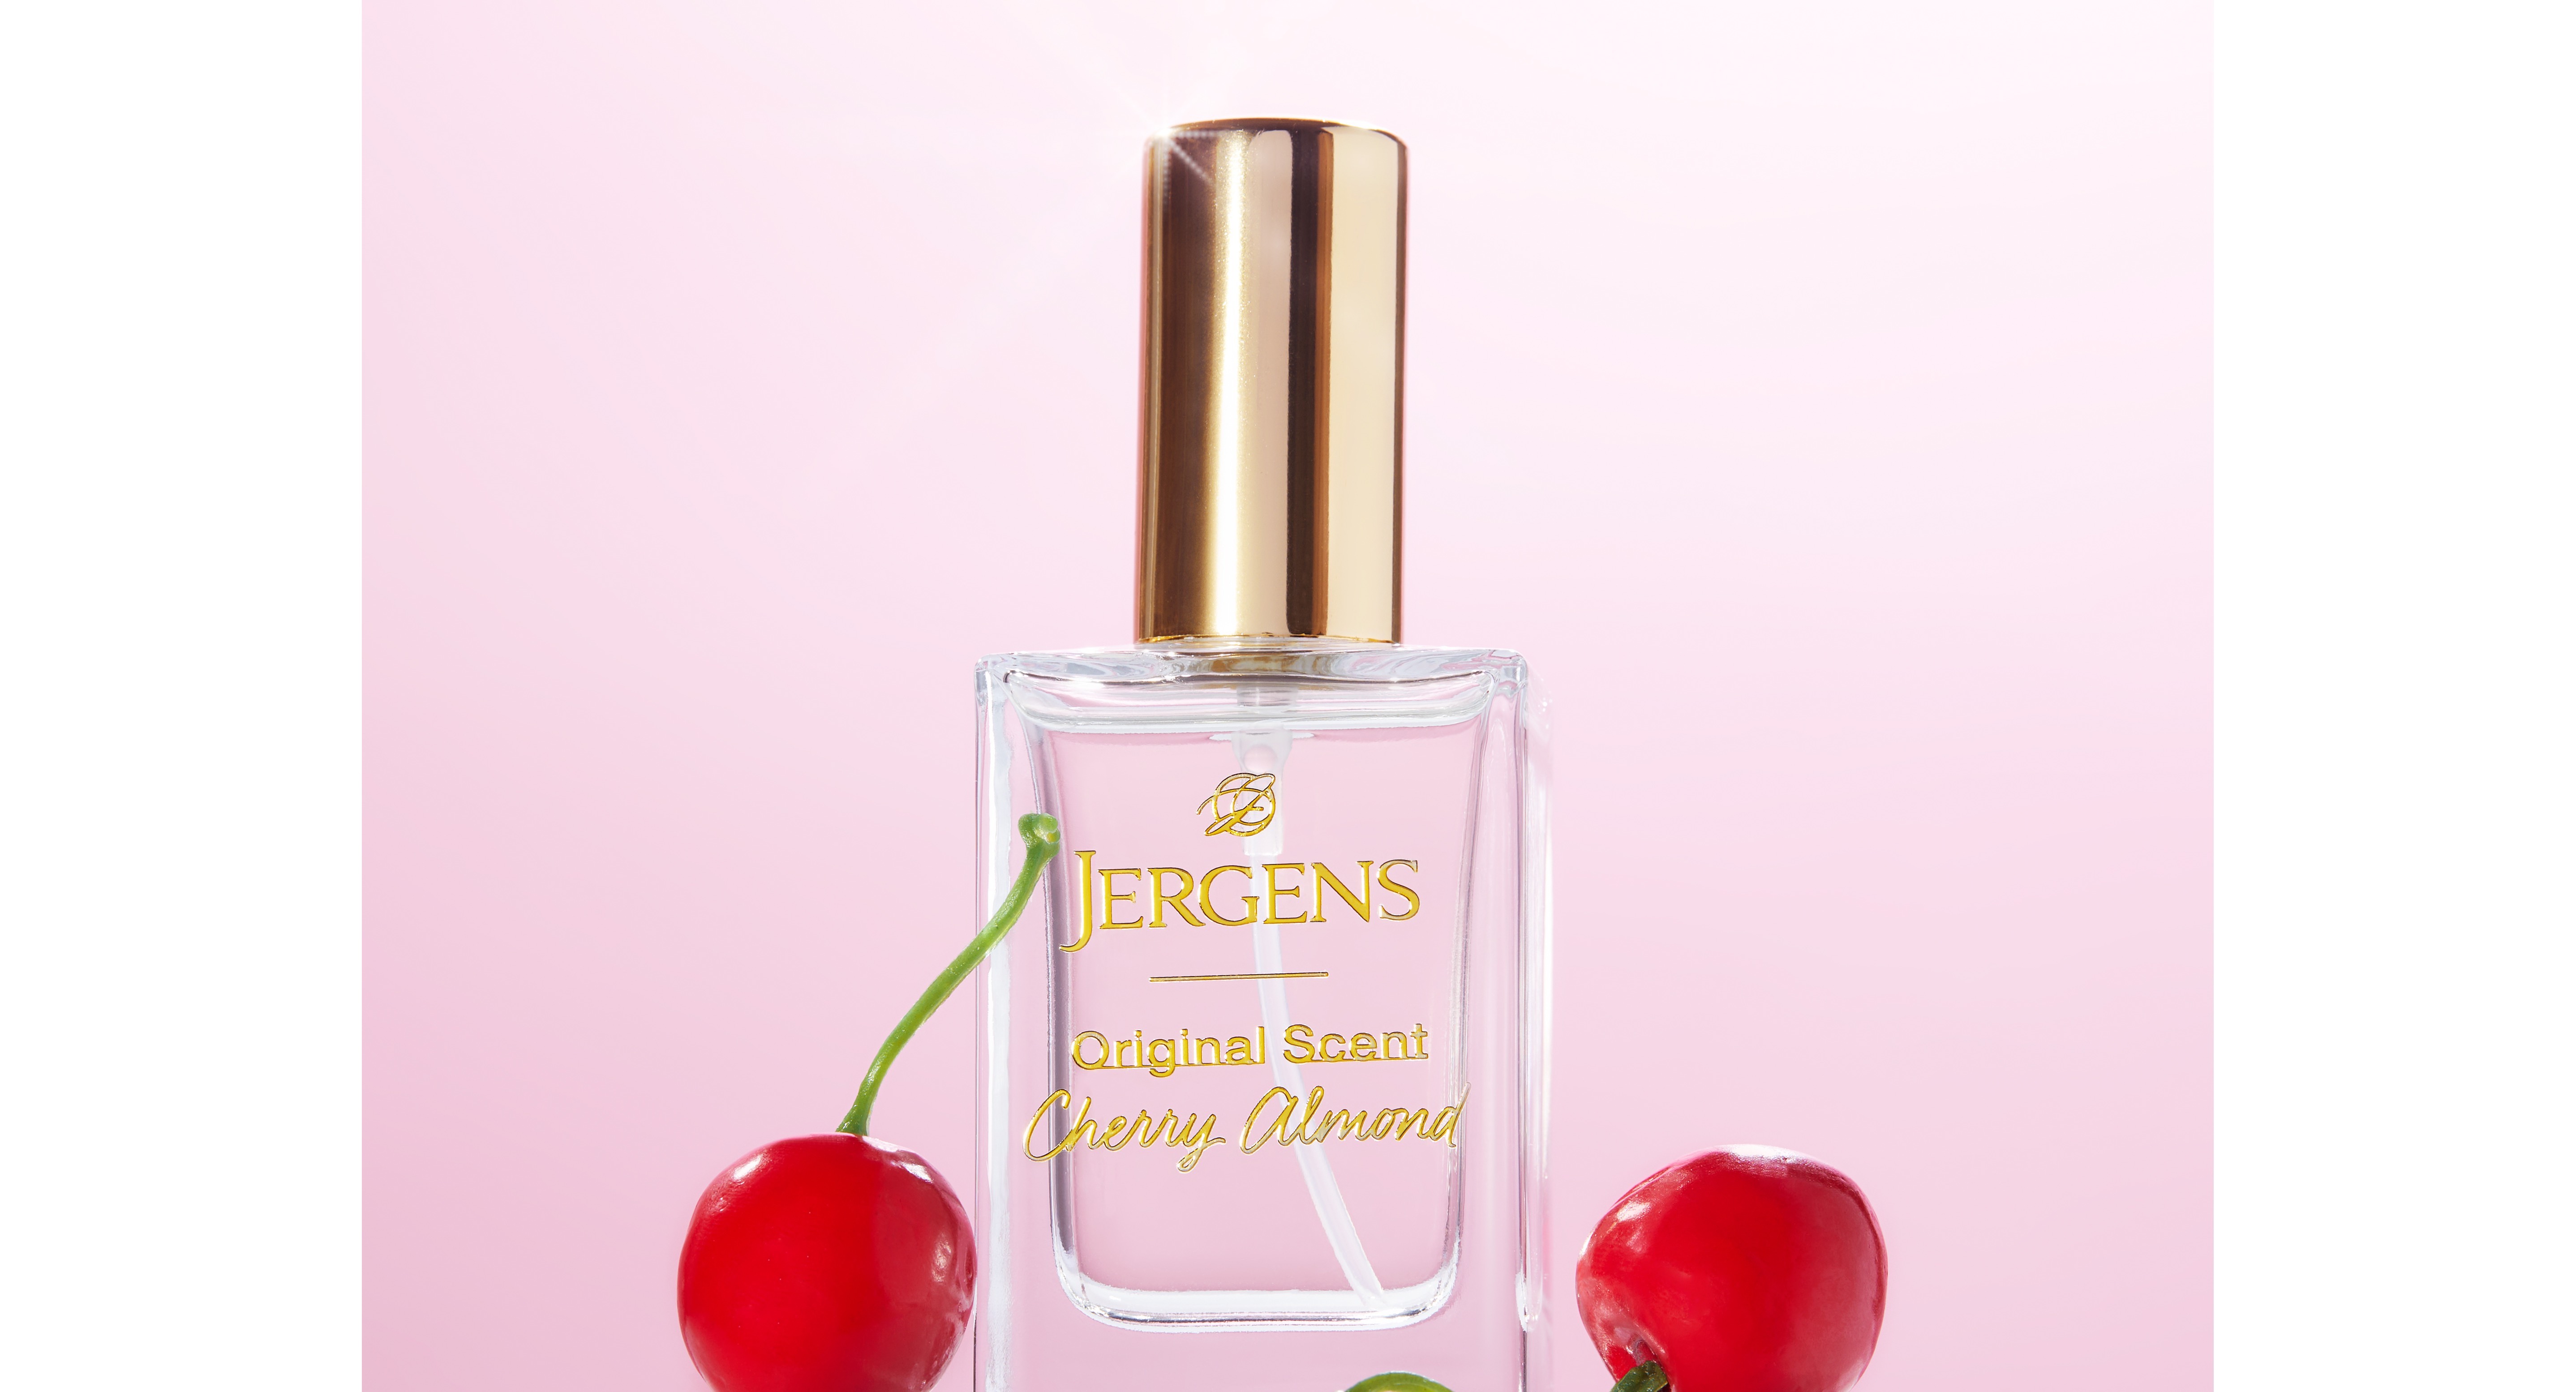 Jergens Makes Signature Cherry Almond Scent Into Limited-Edition Fragrance For Mother’s Day